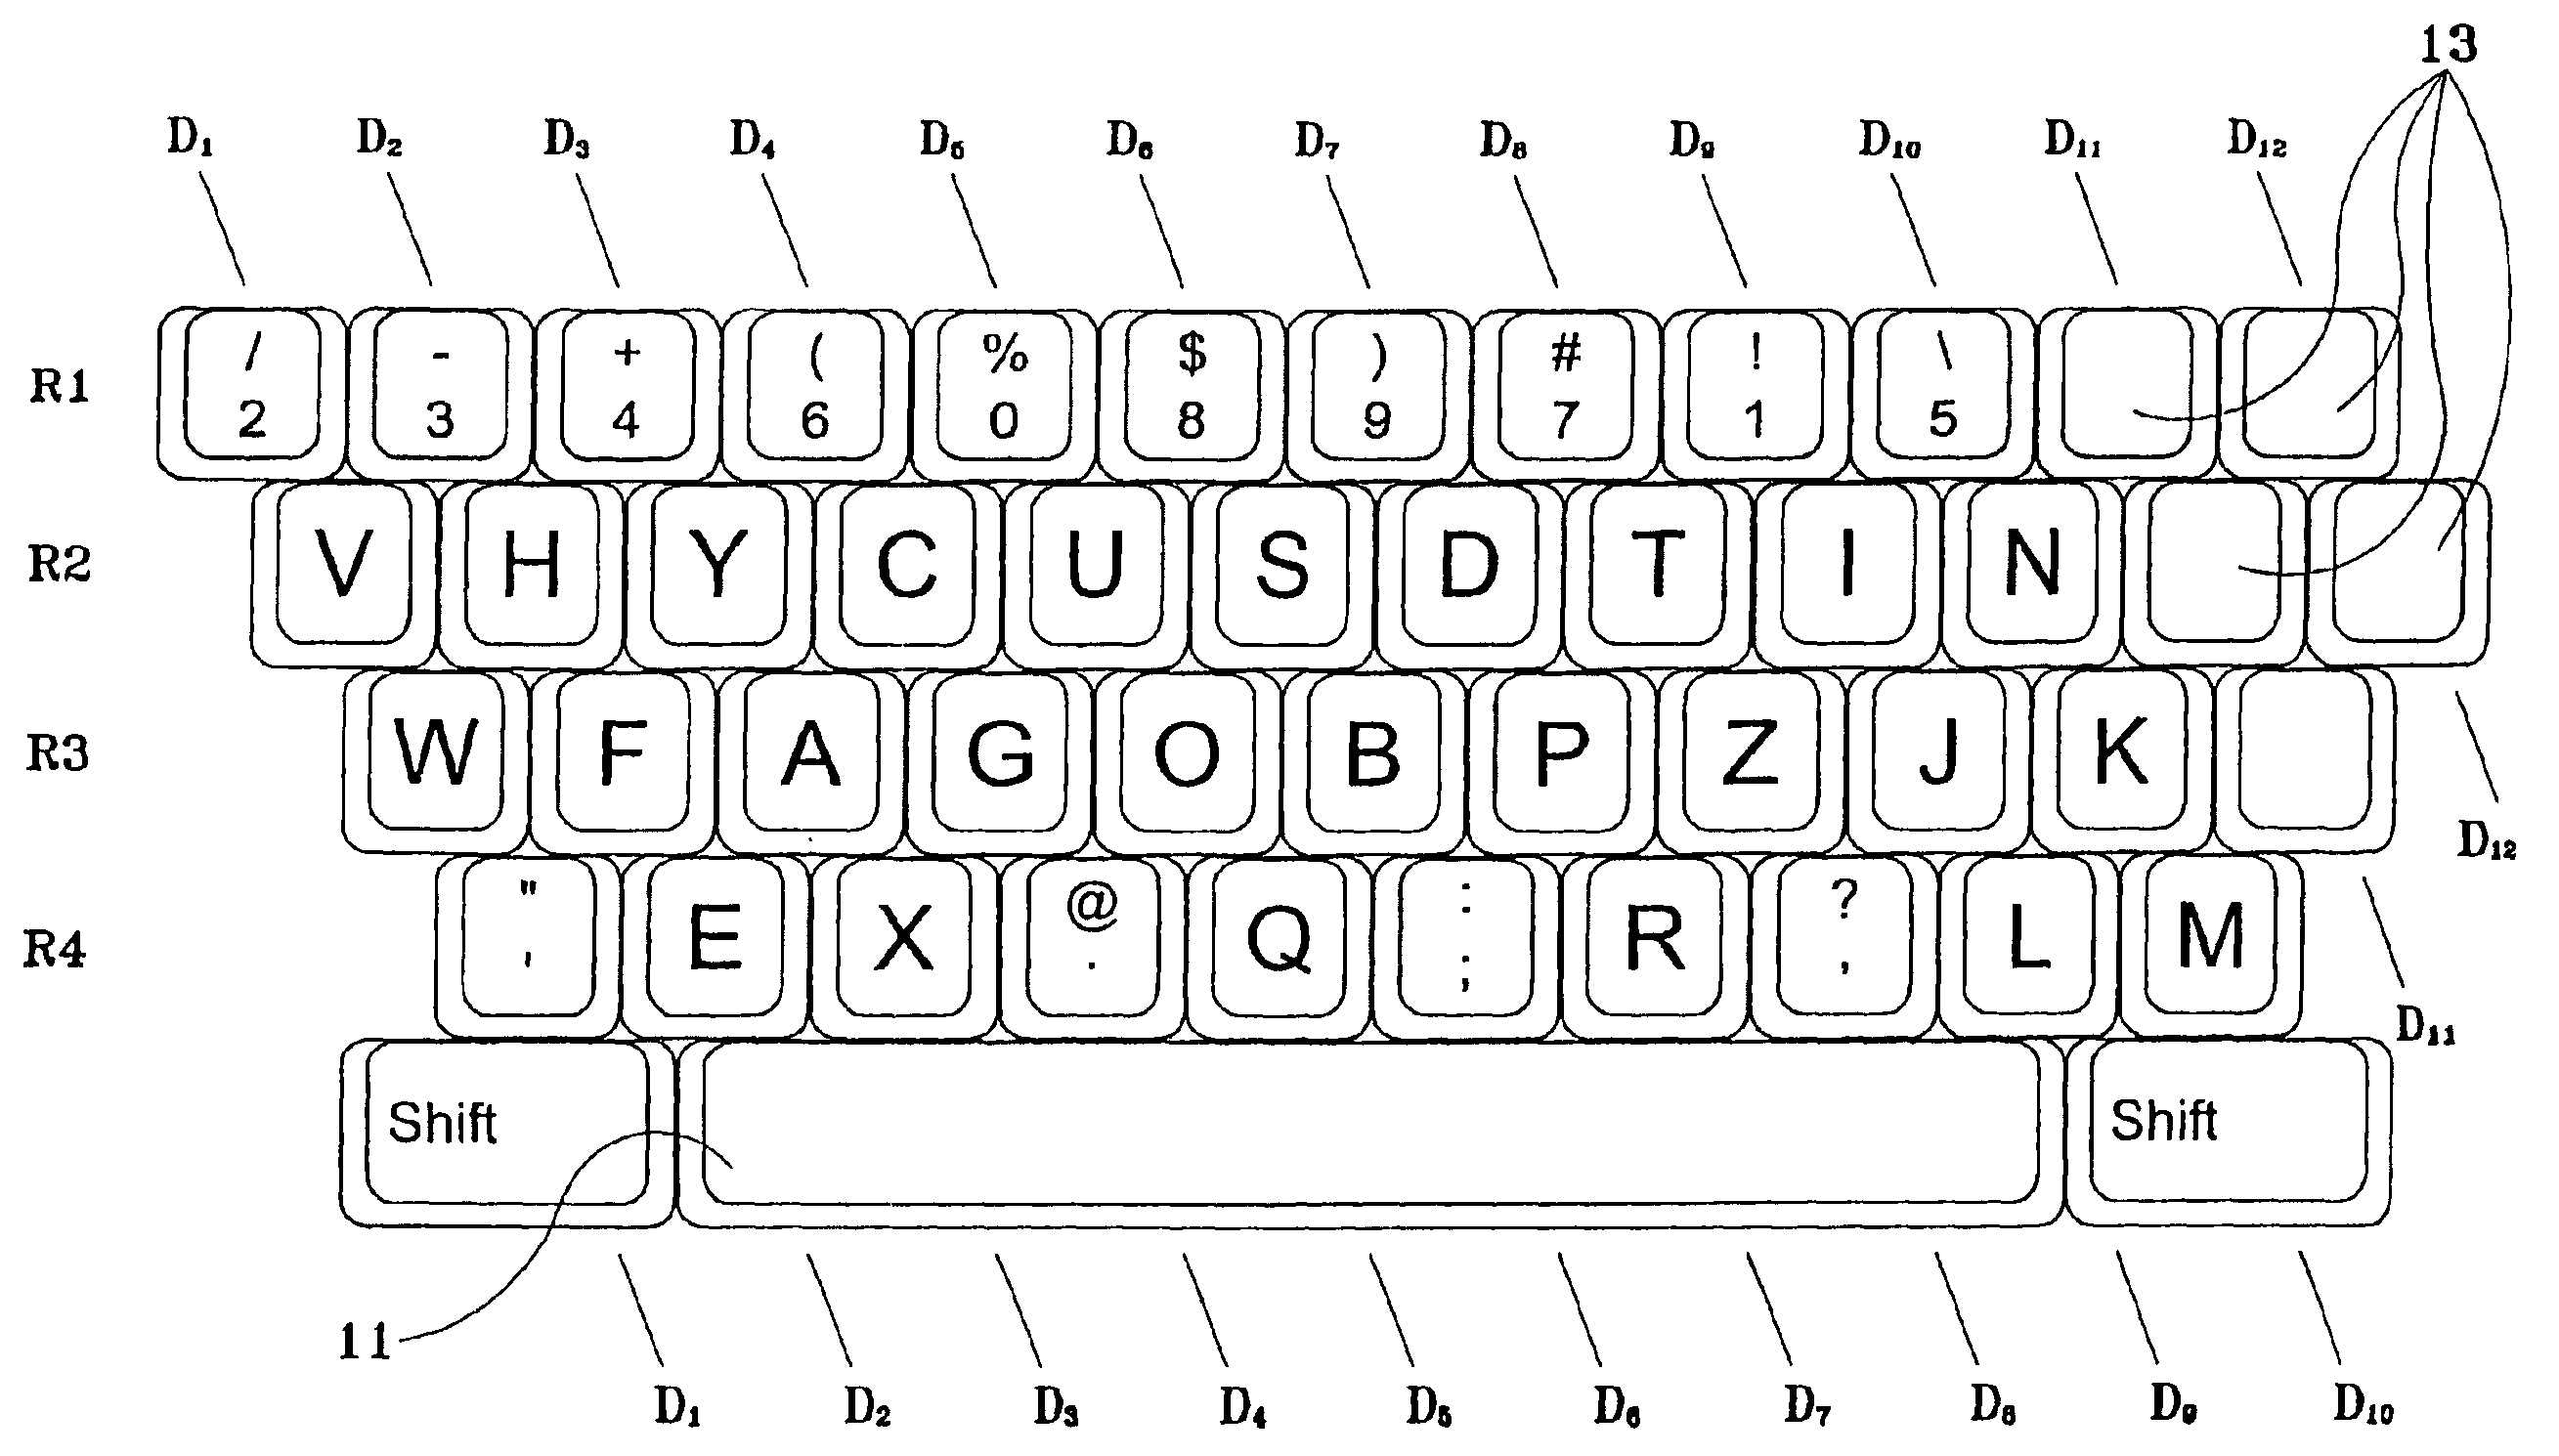 Keyboard arrangement for easy acquisition of typing skills